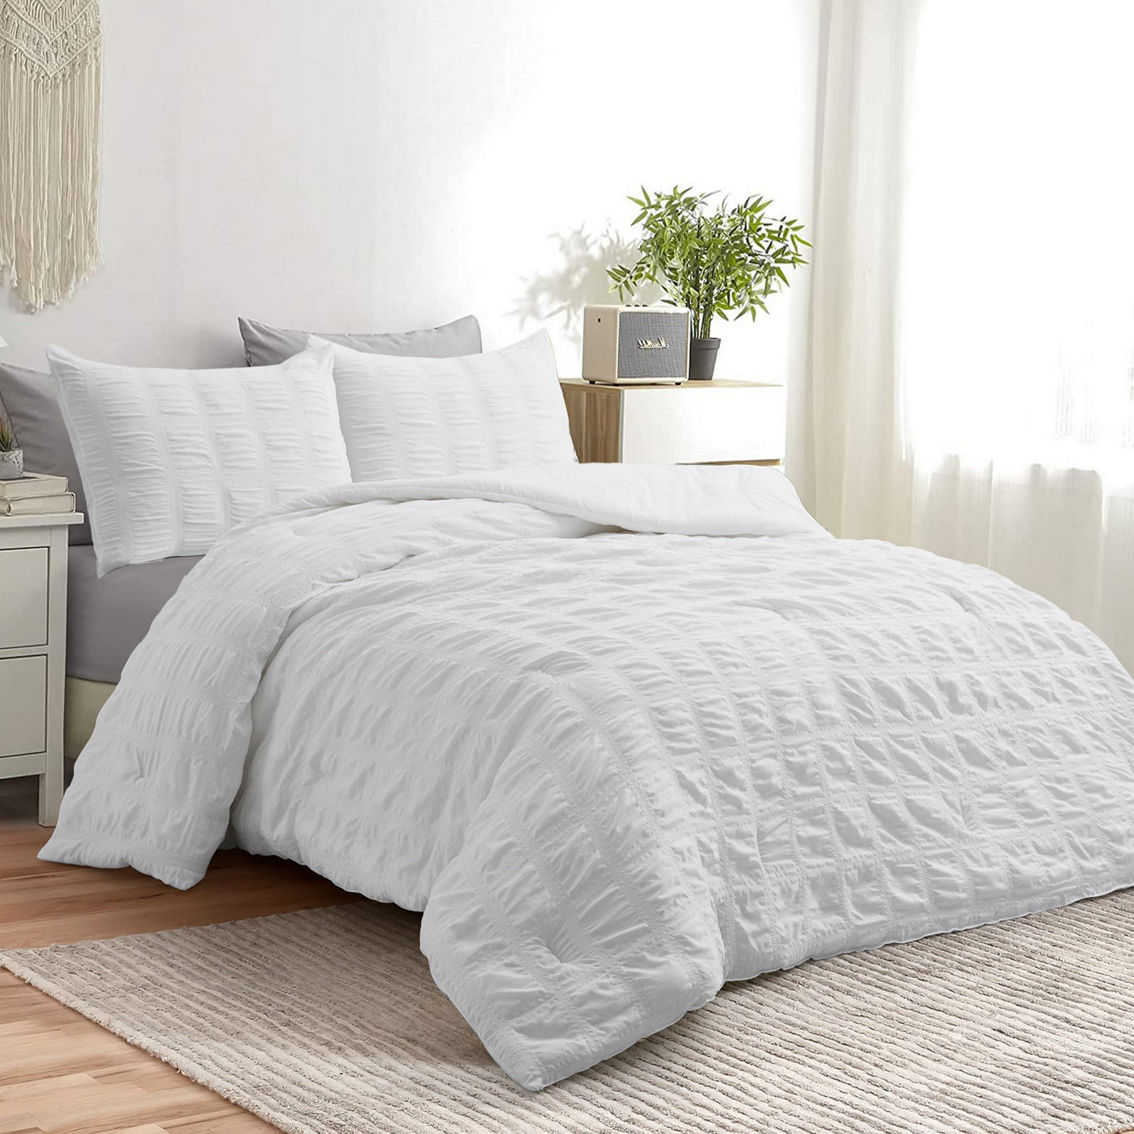 All Season Bubble Ruched Down Alternative Comforter Set - Image 2 of 5